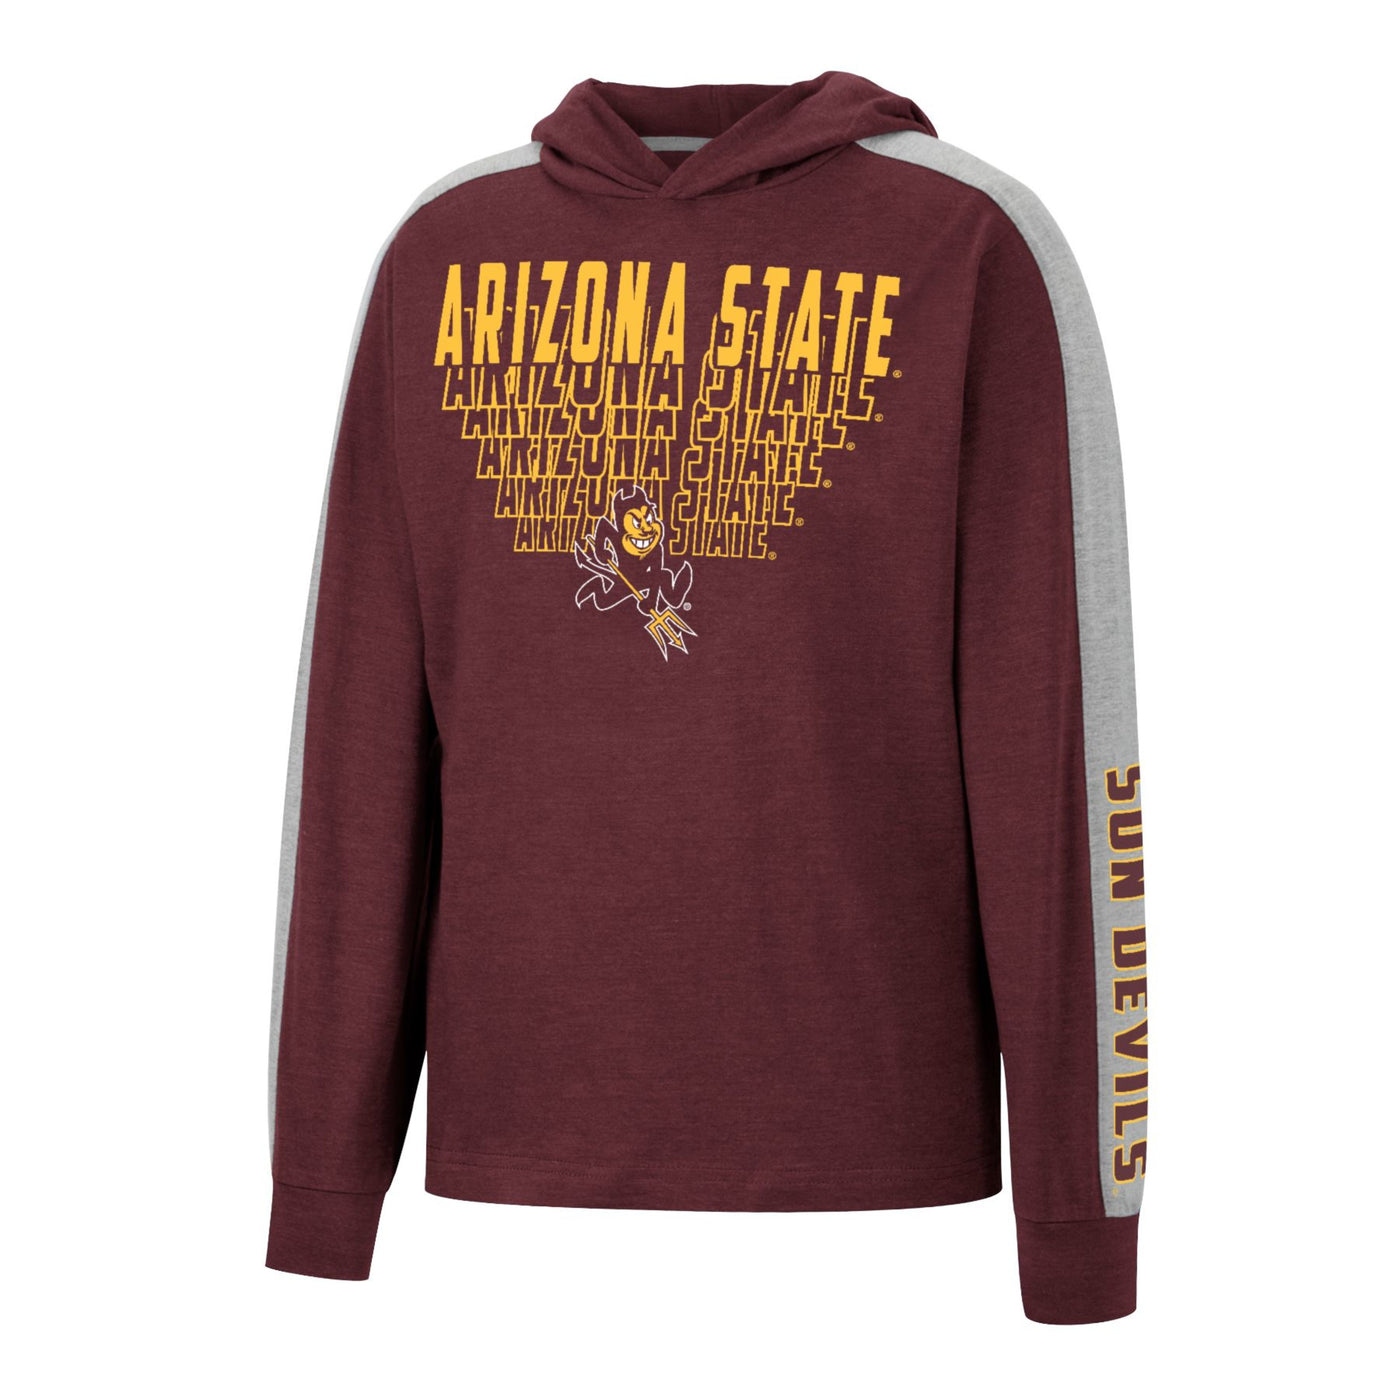 ASU maroon and gray youth hoody long sleeve tee with 'Arizona State' lettering repeating on the front above Sparky